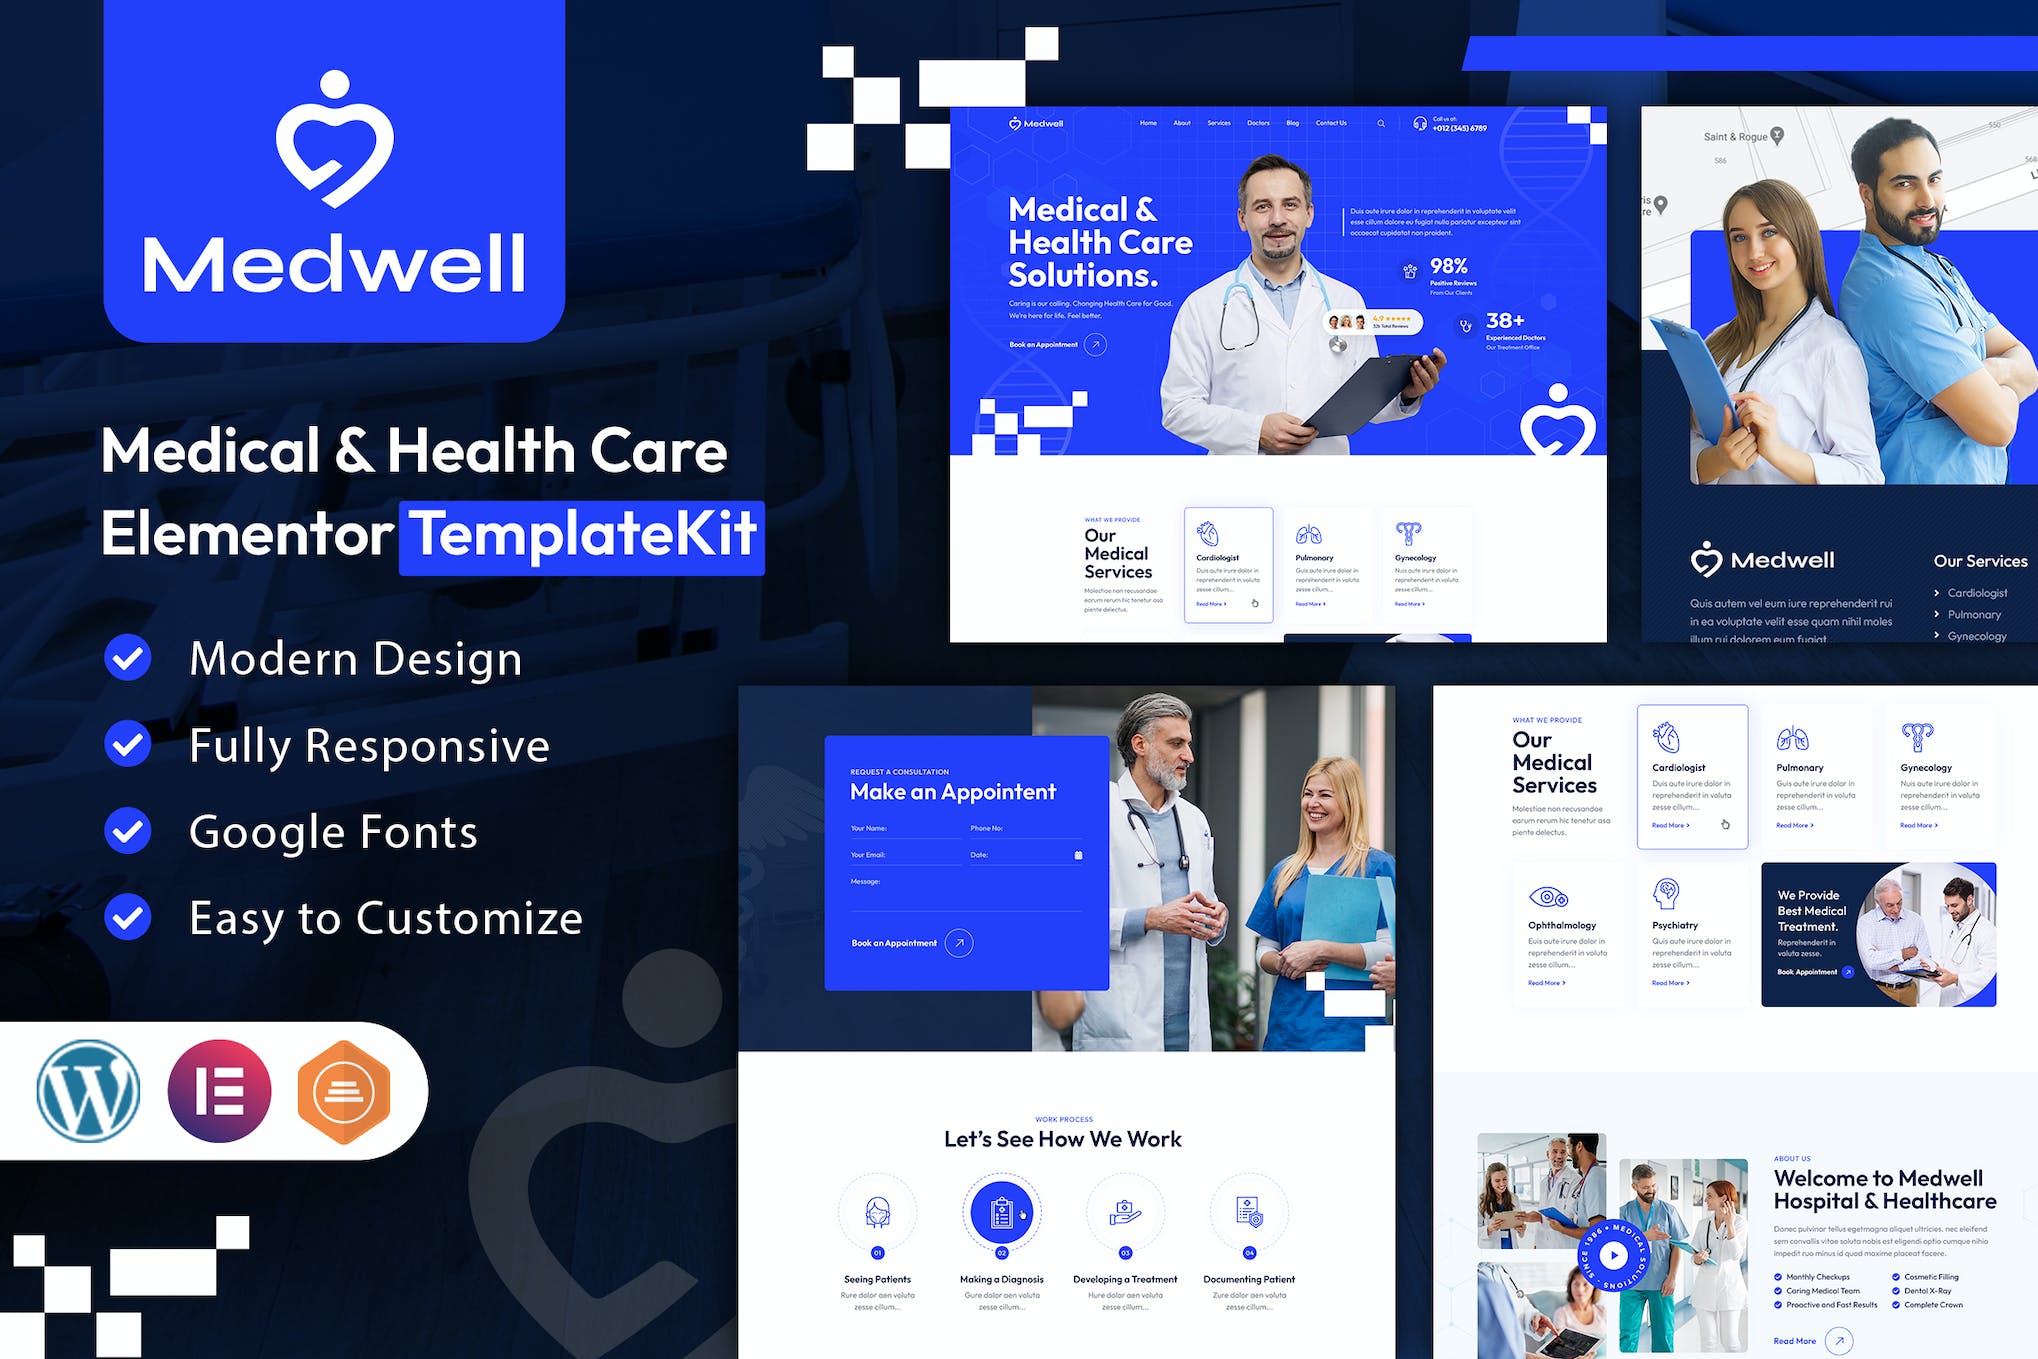 Medwell - Medical & Health Care Elementor Template Kit